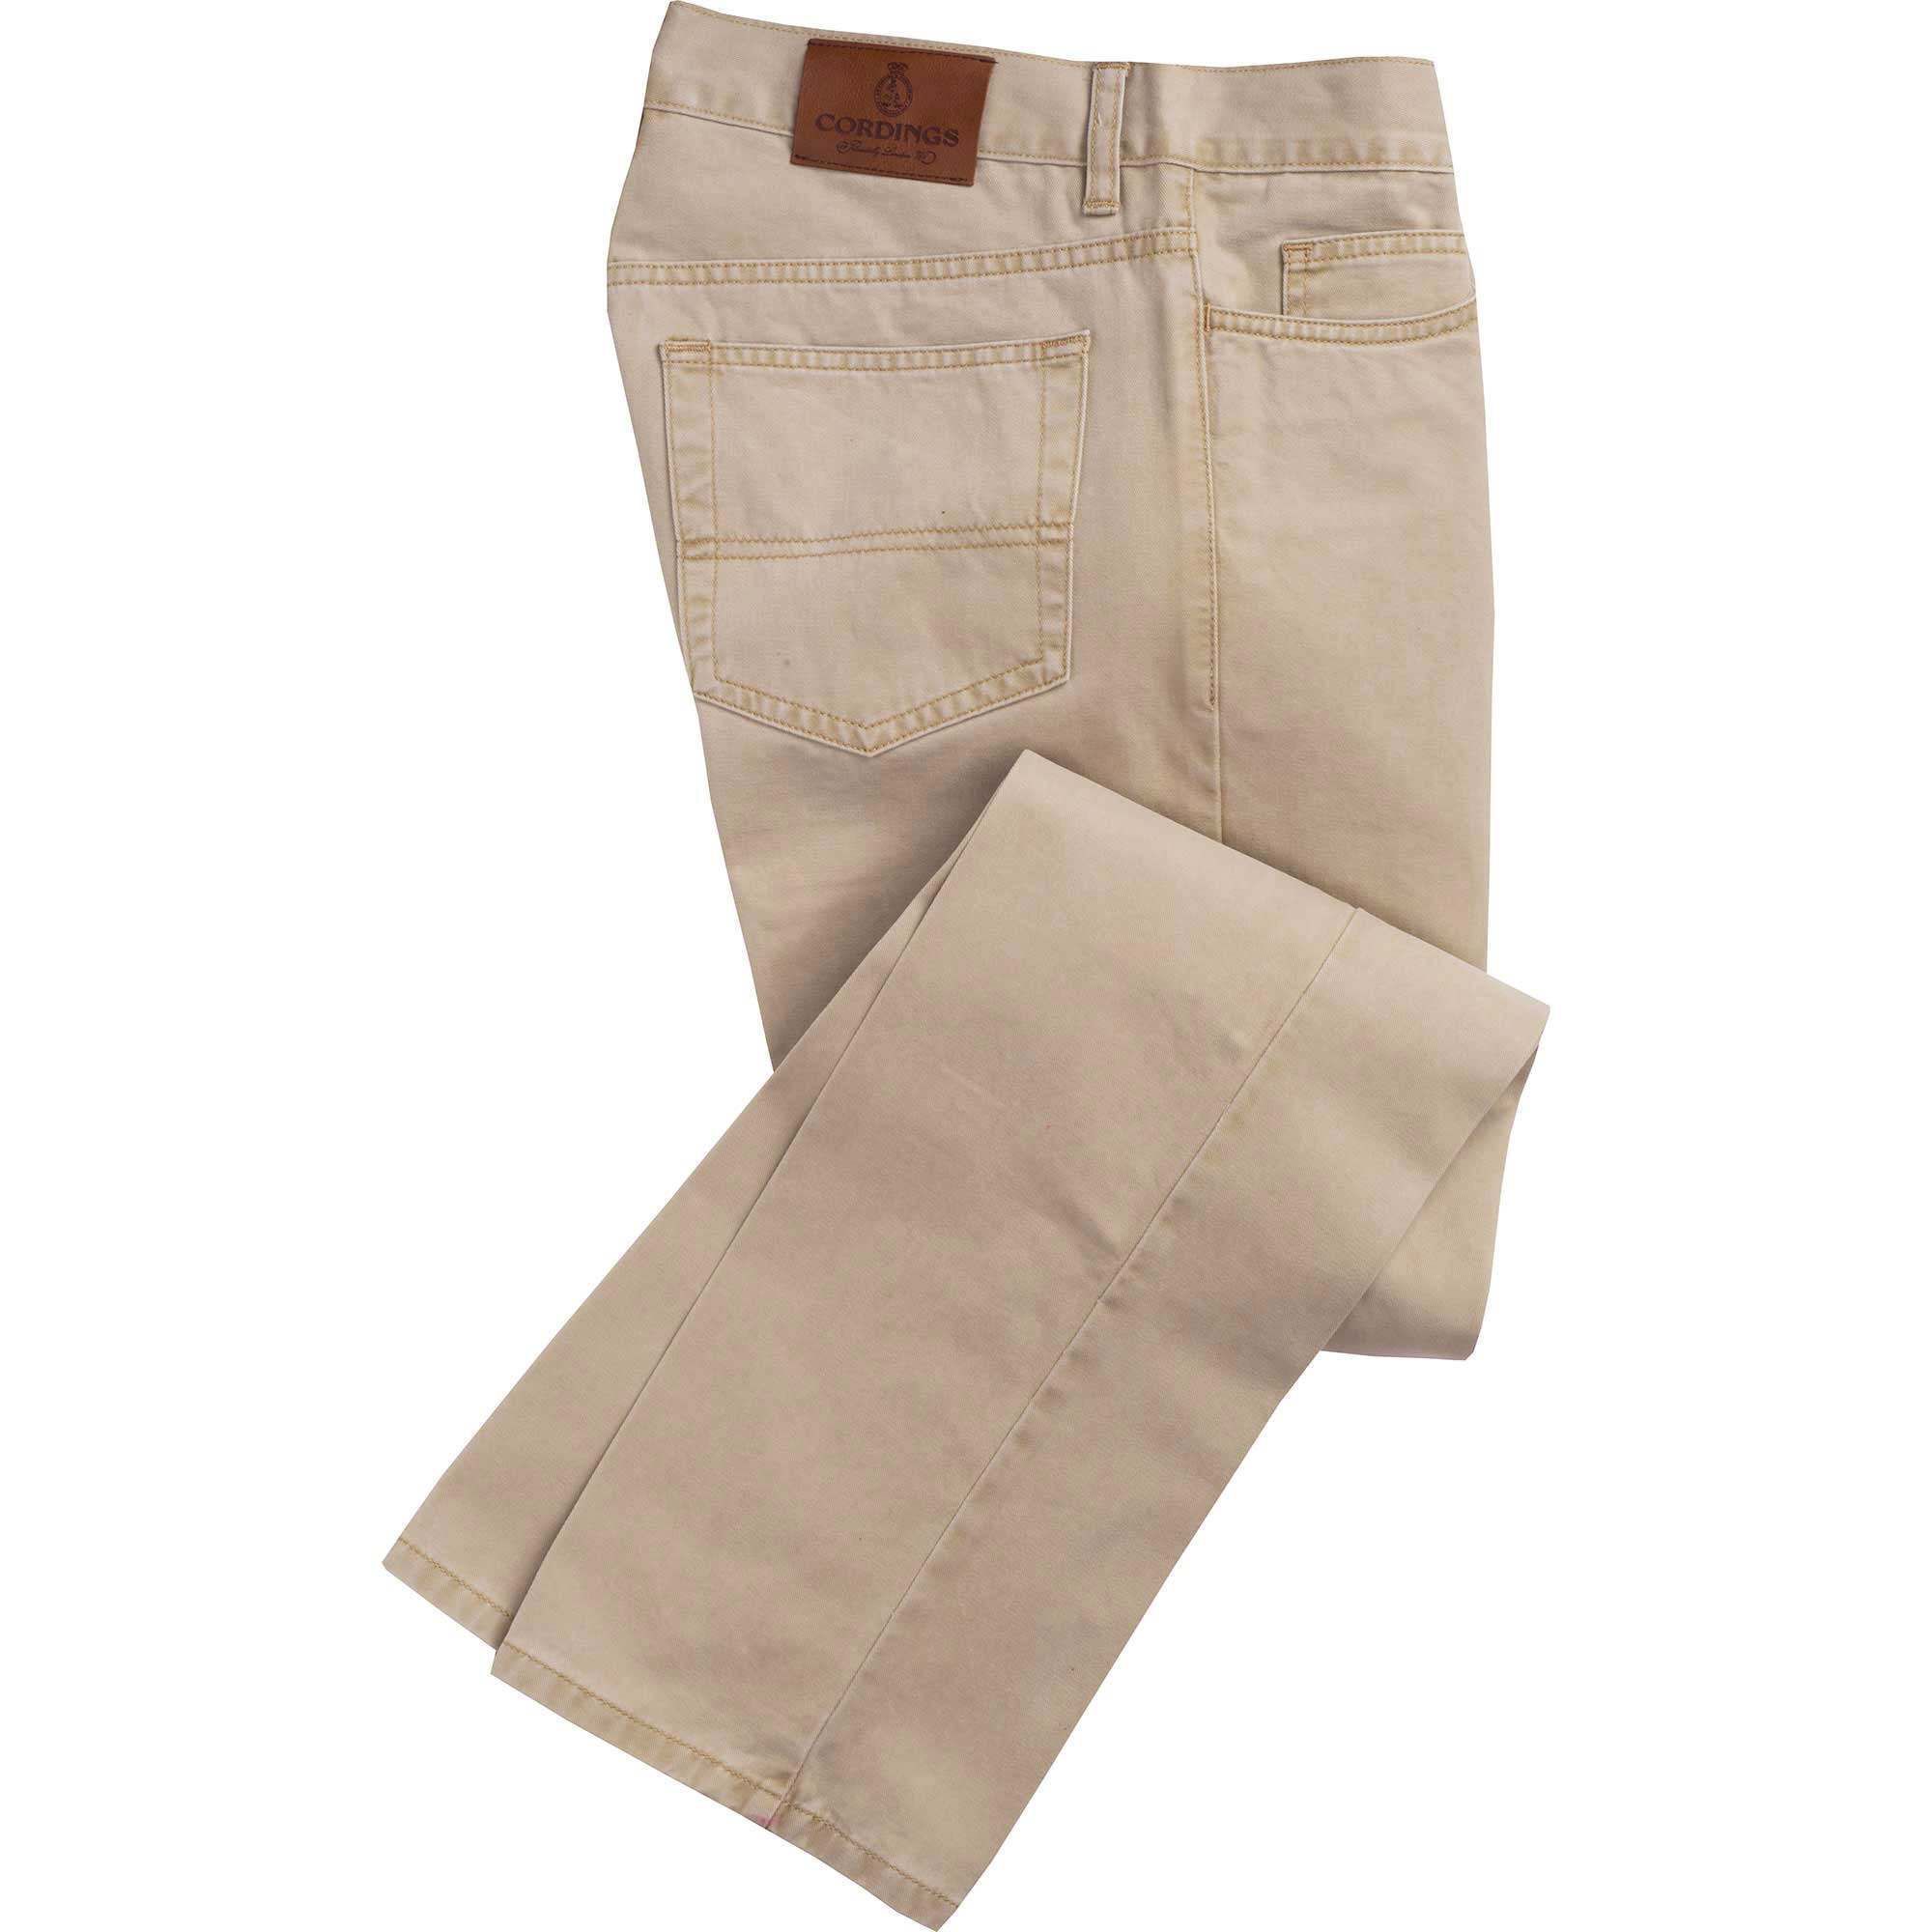 Cottonking S30356 Mens Jeans in Pune at best price by Cotton King - Justdial